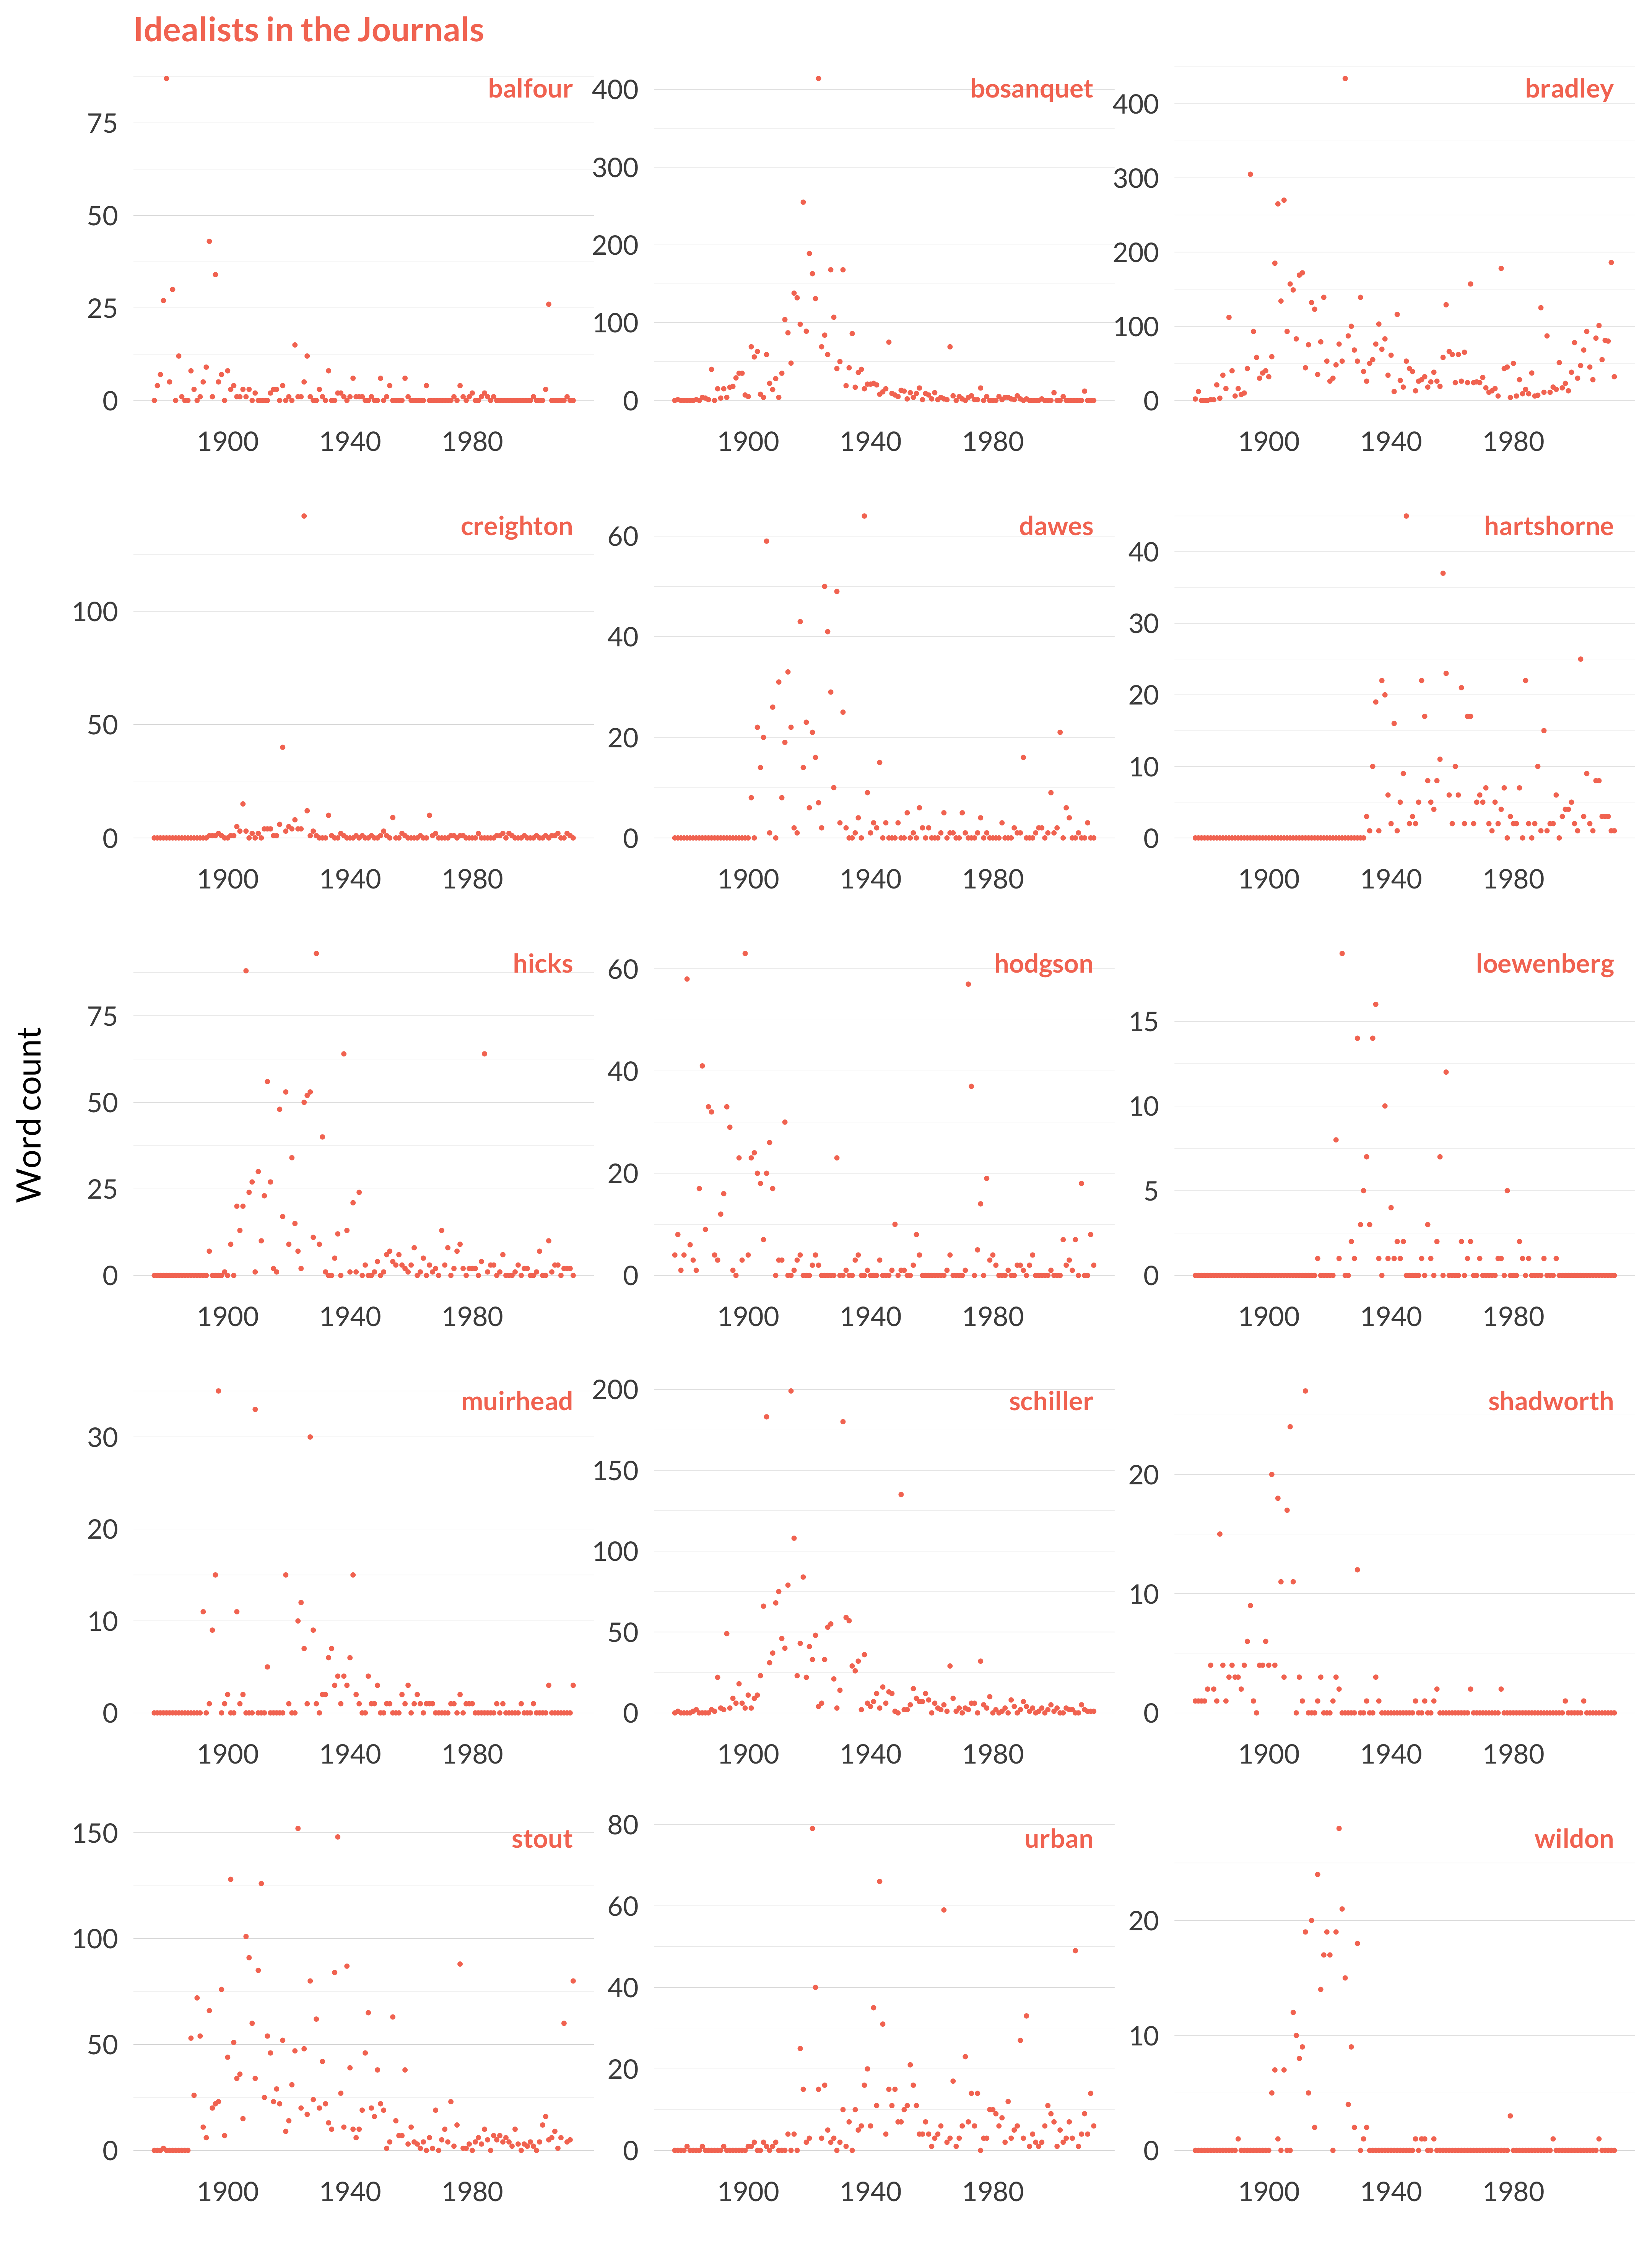 Fifteen scatterplots showing the frequency of names of prominent idealists in the journals over time. The names are bosanquet, schiller, shadworth, hodgson, hartshorne, bradley, dawes, hicks, creighton, muirhead, stout, balfour, wildon, urban, loewenberg. All of them peak fairly early in the data set and then fall away rapidly. The only exceptions are ones where the name has some other use than referring to the famous idealist, as happens with Urban and Bradley.